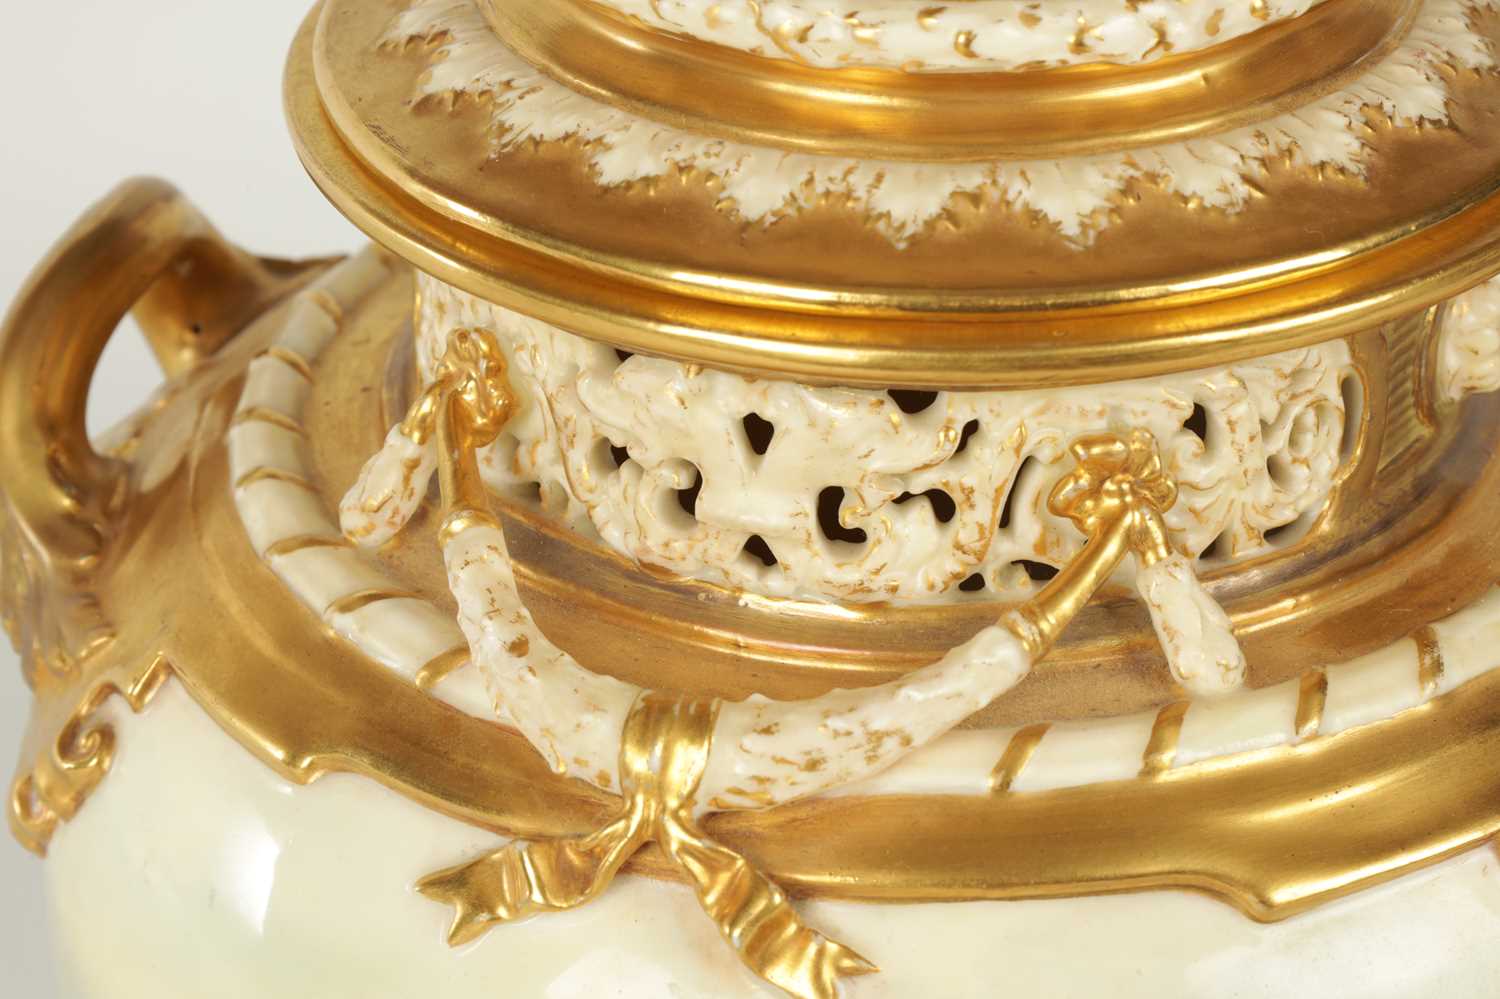 JOHN STINTON. A FINE RICHLY GILT, RELIEF MOULDED TWO HANDLED BULBOUS BLUSHED IVORY POT POURRI CABINE - Image 8 of 11